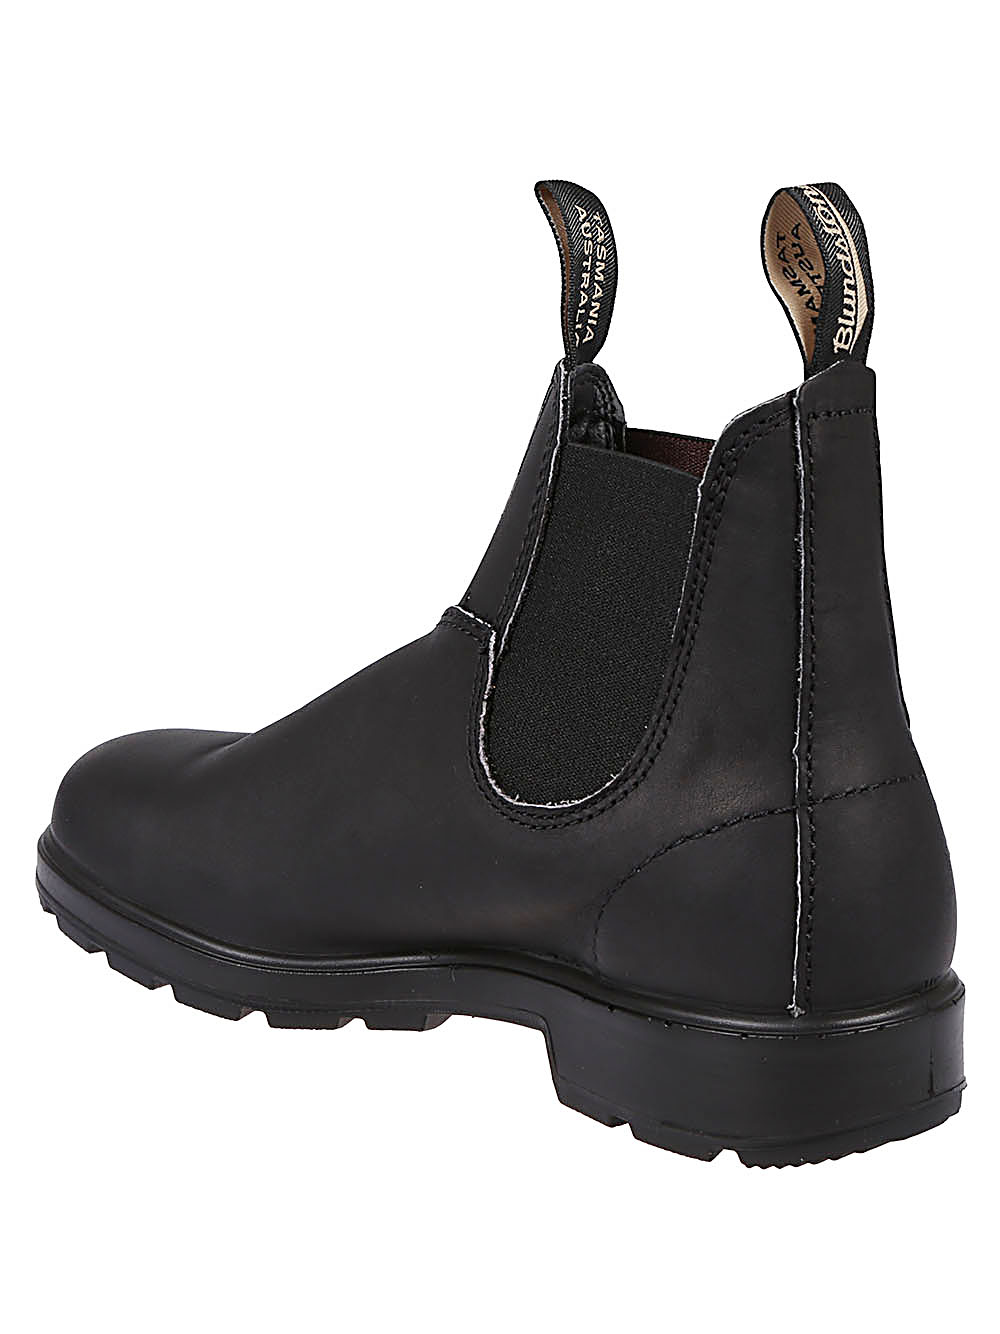 Blundstone BLUNDSTONE- 510 Leather Chelsea Boots